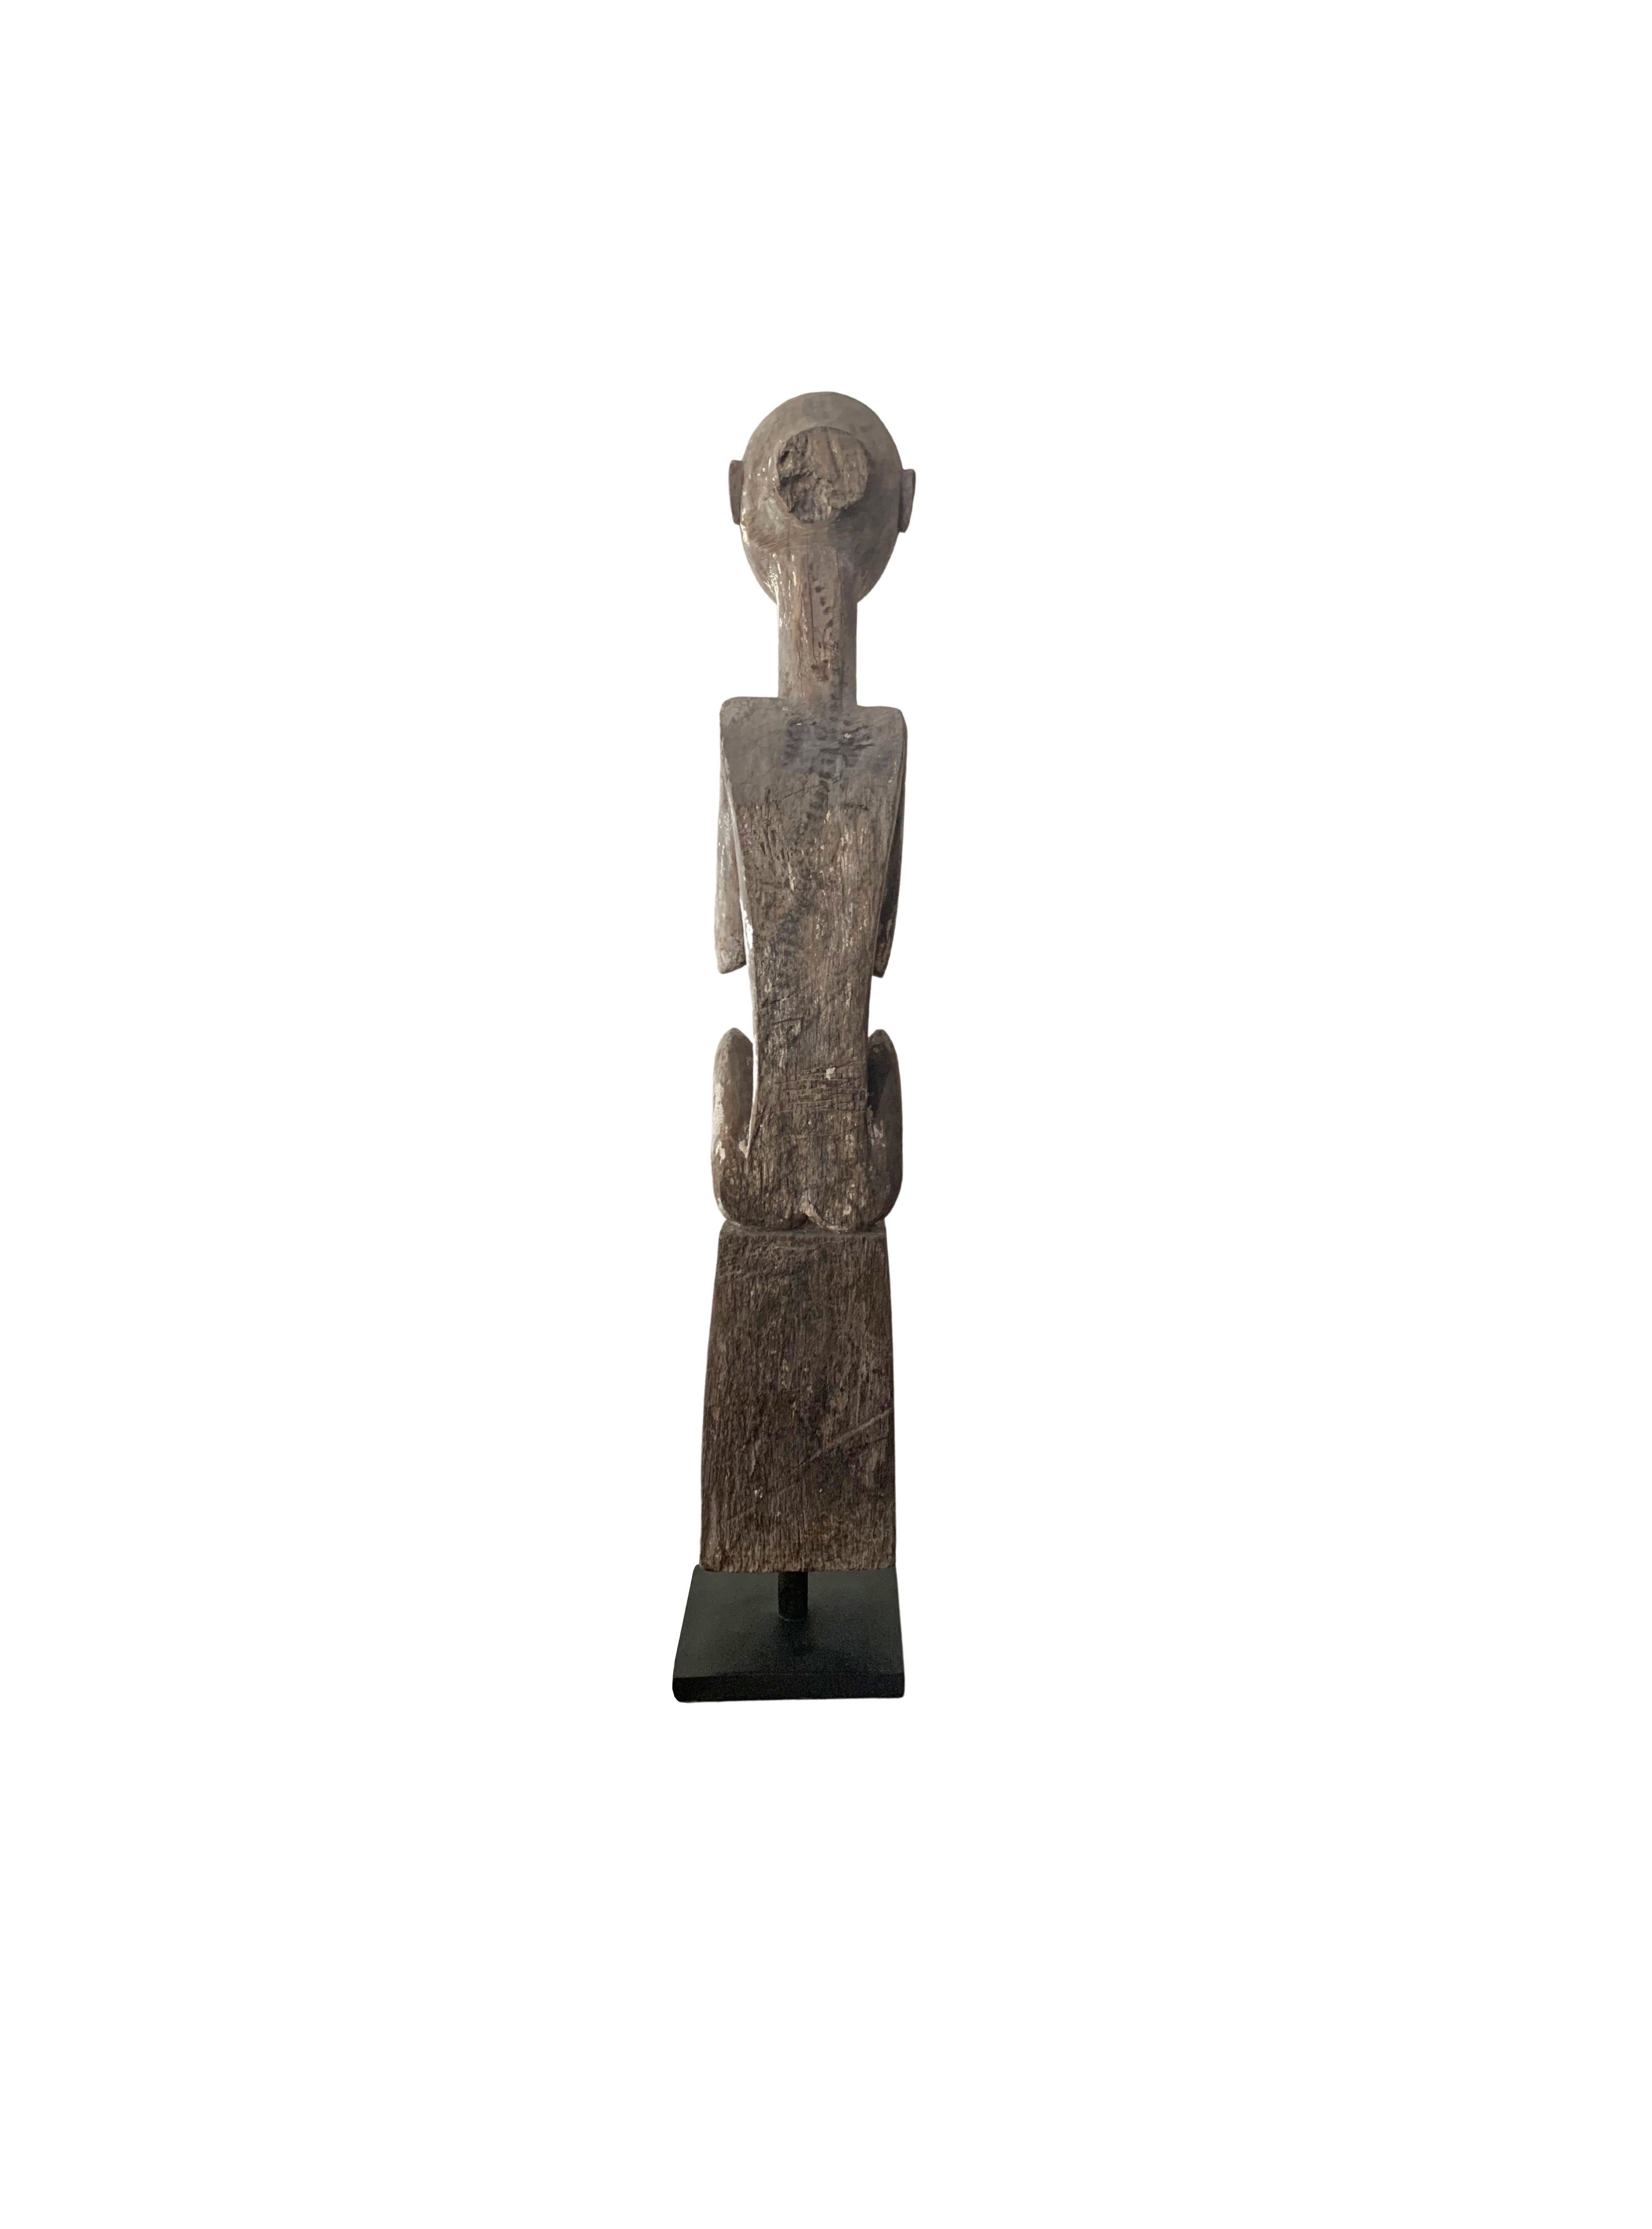 Wooden Tribal Sculpture / Carving of Ancestral Figure, Sumba Island, Indonesia 3